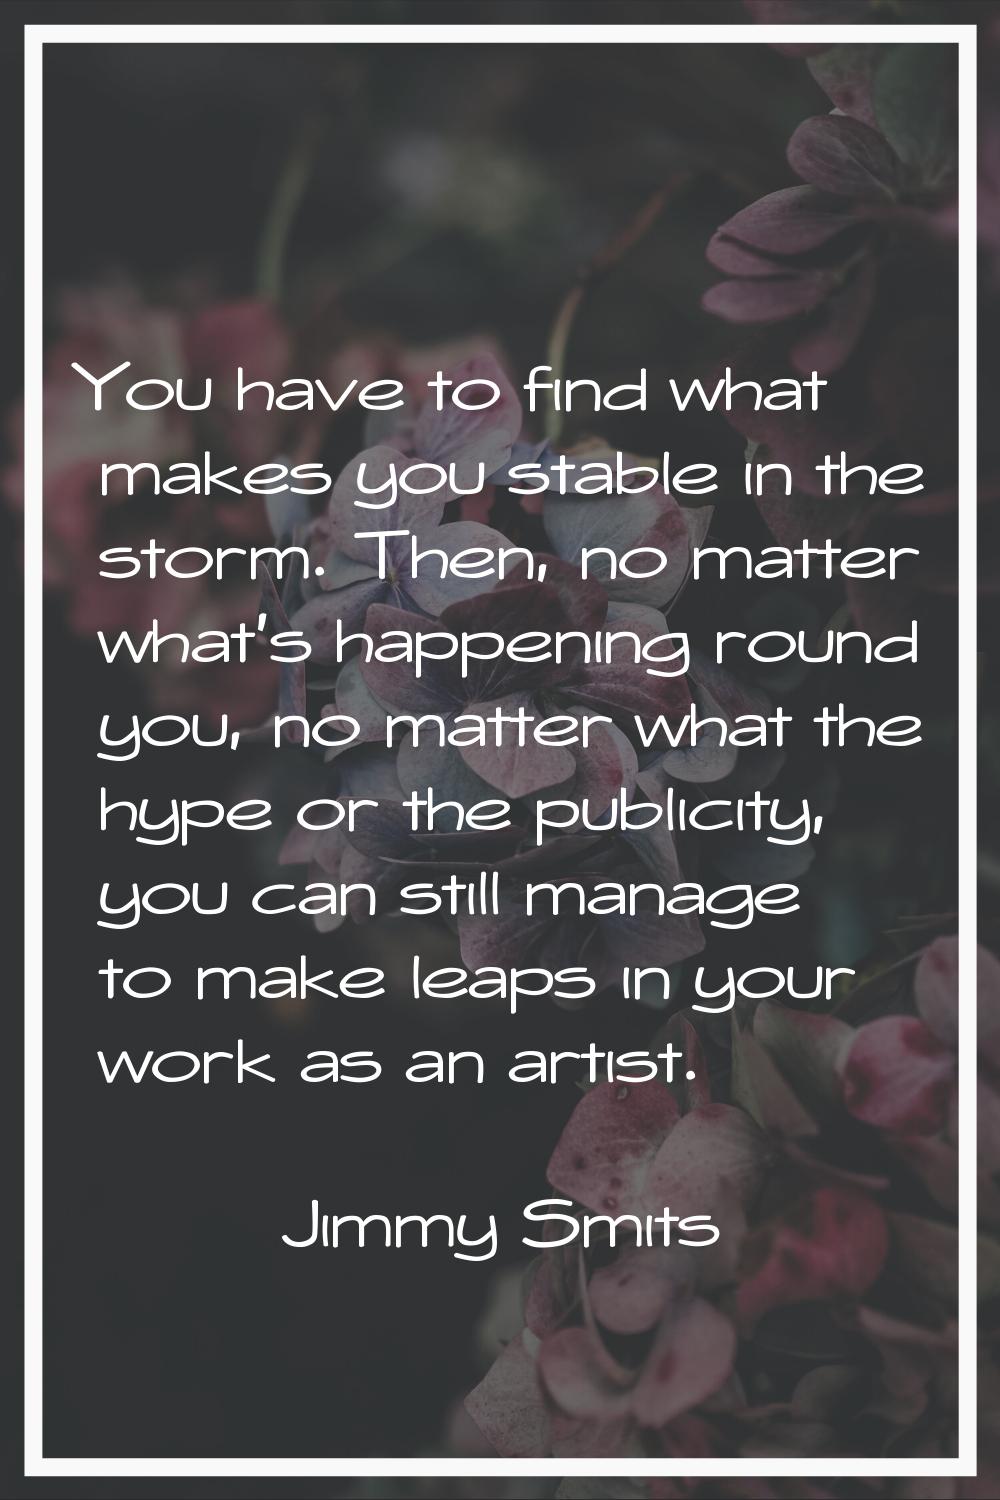 You have to find what makes you stable in the storm. Then, no matter what's happening round you, no